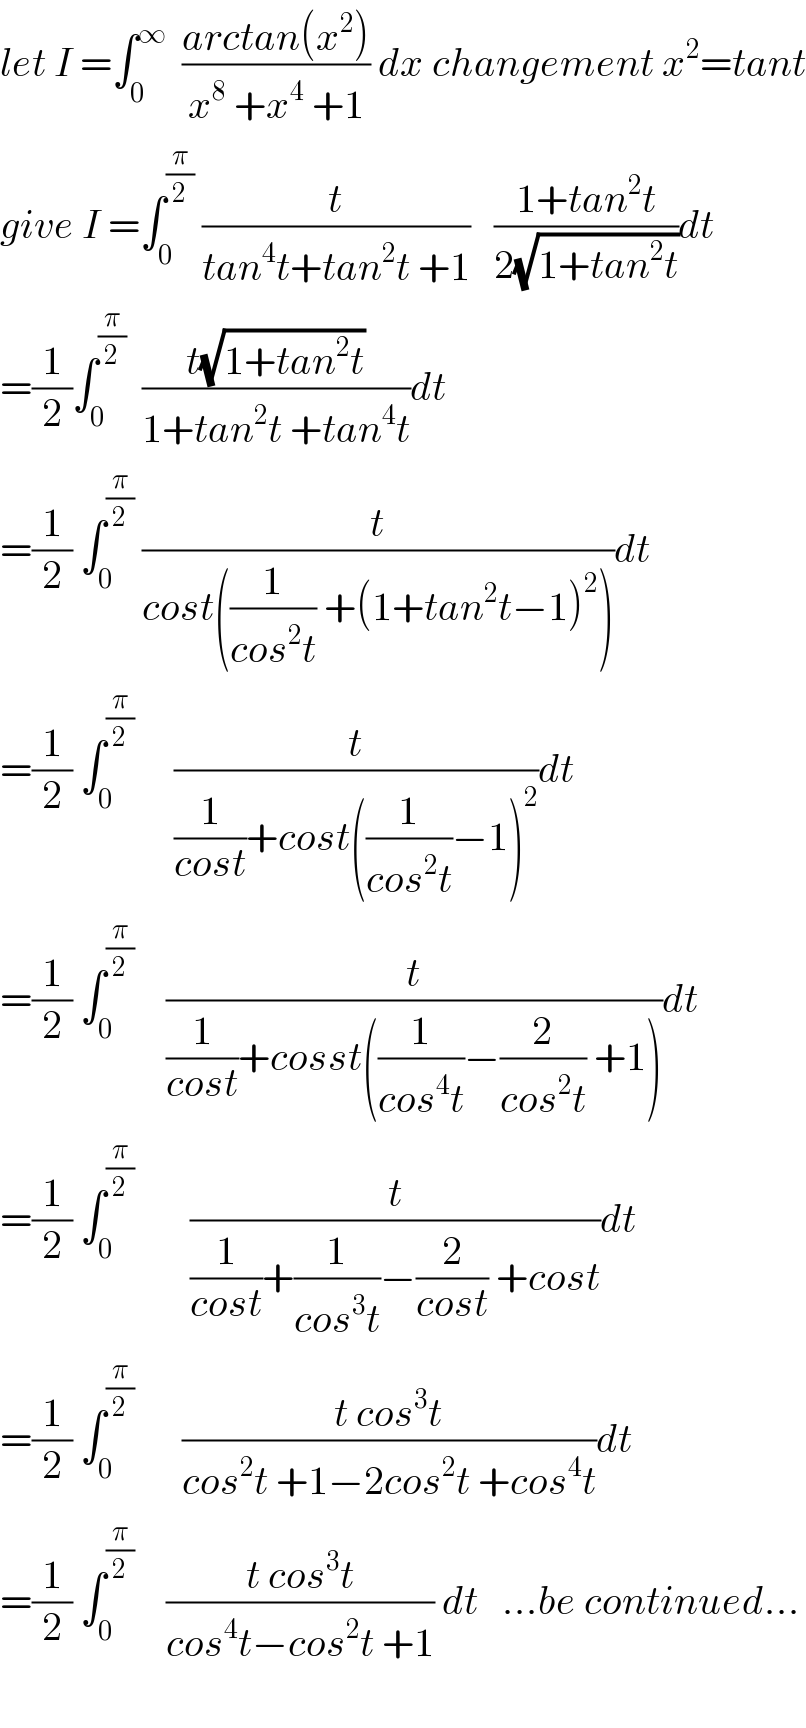 let I =∫_0 ^∞   ((arctan(x^2 ))/(x^8  +x^4  +1)) dx changement x^2 =tant  give I =∫_0 ^(π/2)  (t/(tan^4 t+tan^2 t +1))   ((1+tan^2 t)/(2(√(1+tan^2 t))))dt  =(1/2)∫_0 ^(π/2)   ((t(√(1+tan^2 t)))/(1+tan^2 t +tan^4 t))dt  =(1/2) ∫_0 ^(π/2)  (t/(cost((1/(cos^2 t)) +(1+tan^2 t−1)^2 )))dt  =(1/2) ∫_0 ^(π/2)      (t/((1/(cost))+cost((1/(cos^2 t))−1)^2 ))dt  =(1/2) ∫_0 ^(π/2)     (t/((1/(cost))+cosst((1/(cos^4 t))−(2/(cos^2 t)) +1)))dt  =(1/2) ∫_0 ^(π/2)        (t/((1/(cost))+(1/(cos^3 t))−(2/(cost)) +cost))dt  =(1/2) ∫_0 ^(π/2)       ((t cos^3 t)/(cos^2 t +1−2cos^2 t +cos^4 t))dt  =(1/2) ∫_0 ^(π/2)     ((t cos^3 t)/(cos^4 t−cos^2 t +1)) dt   ...be continued...    